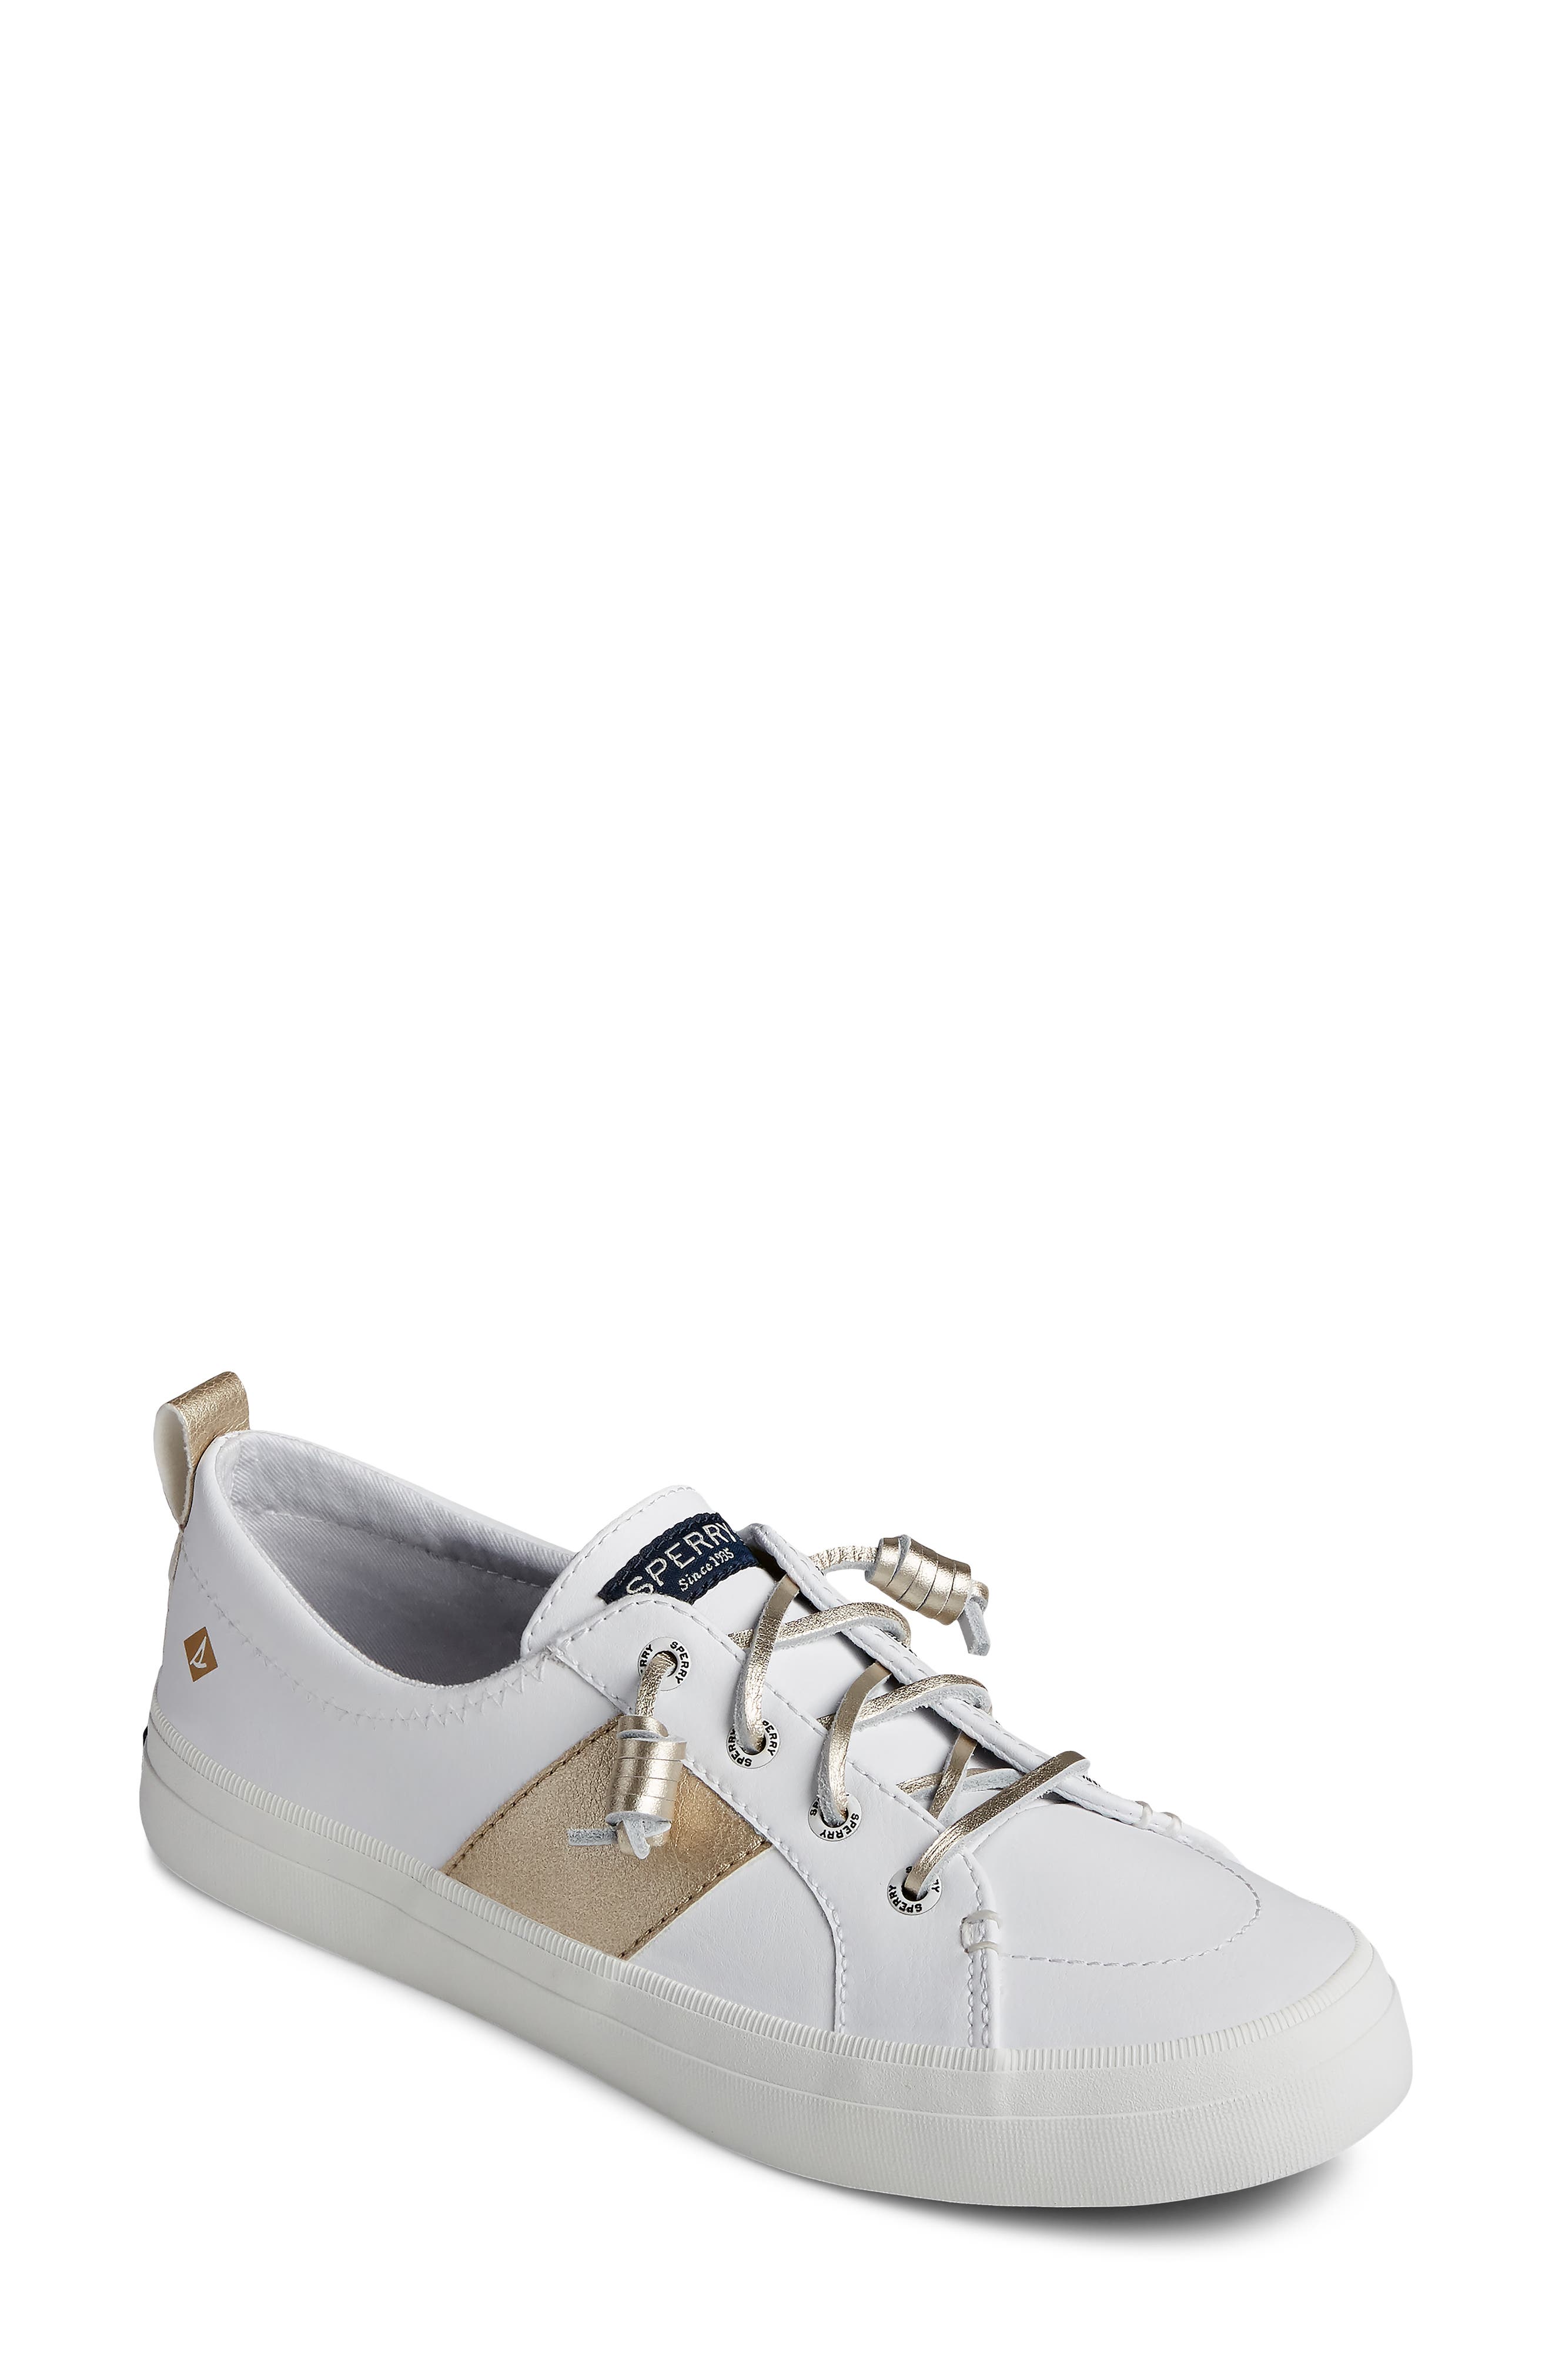 nordstrom sperry womens